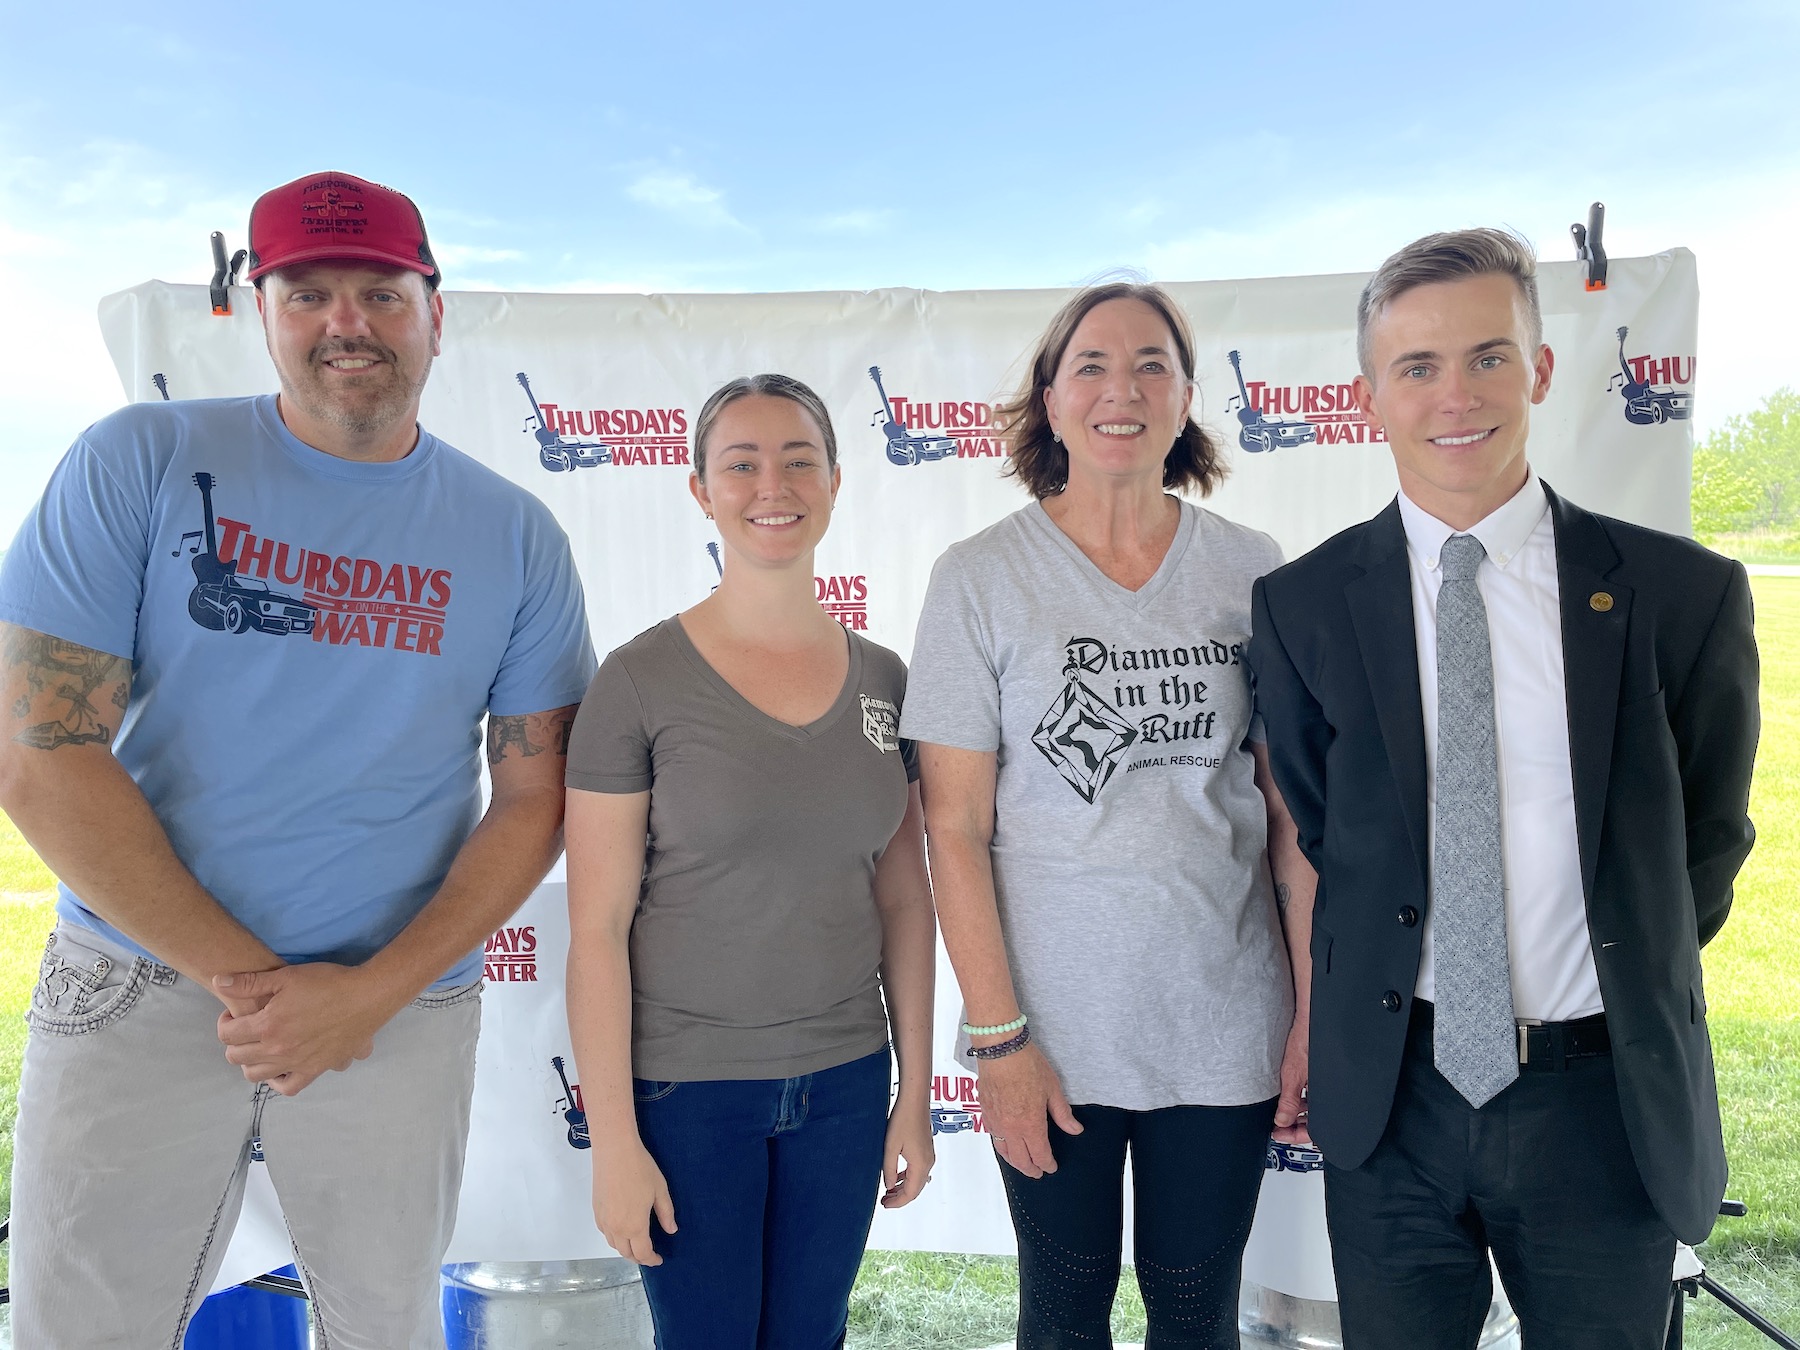 Pictured at the `Thursdays on the Water` press conference are, from left, Jesse Gooch; Leandra Herzog and Tammy Heim of Diamonds in the Ruff Animal Rescue; and City of North Tonawanda Mayor Austin Tylec.